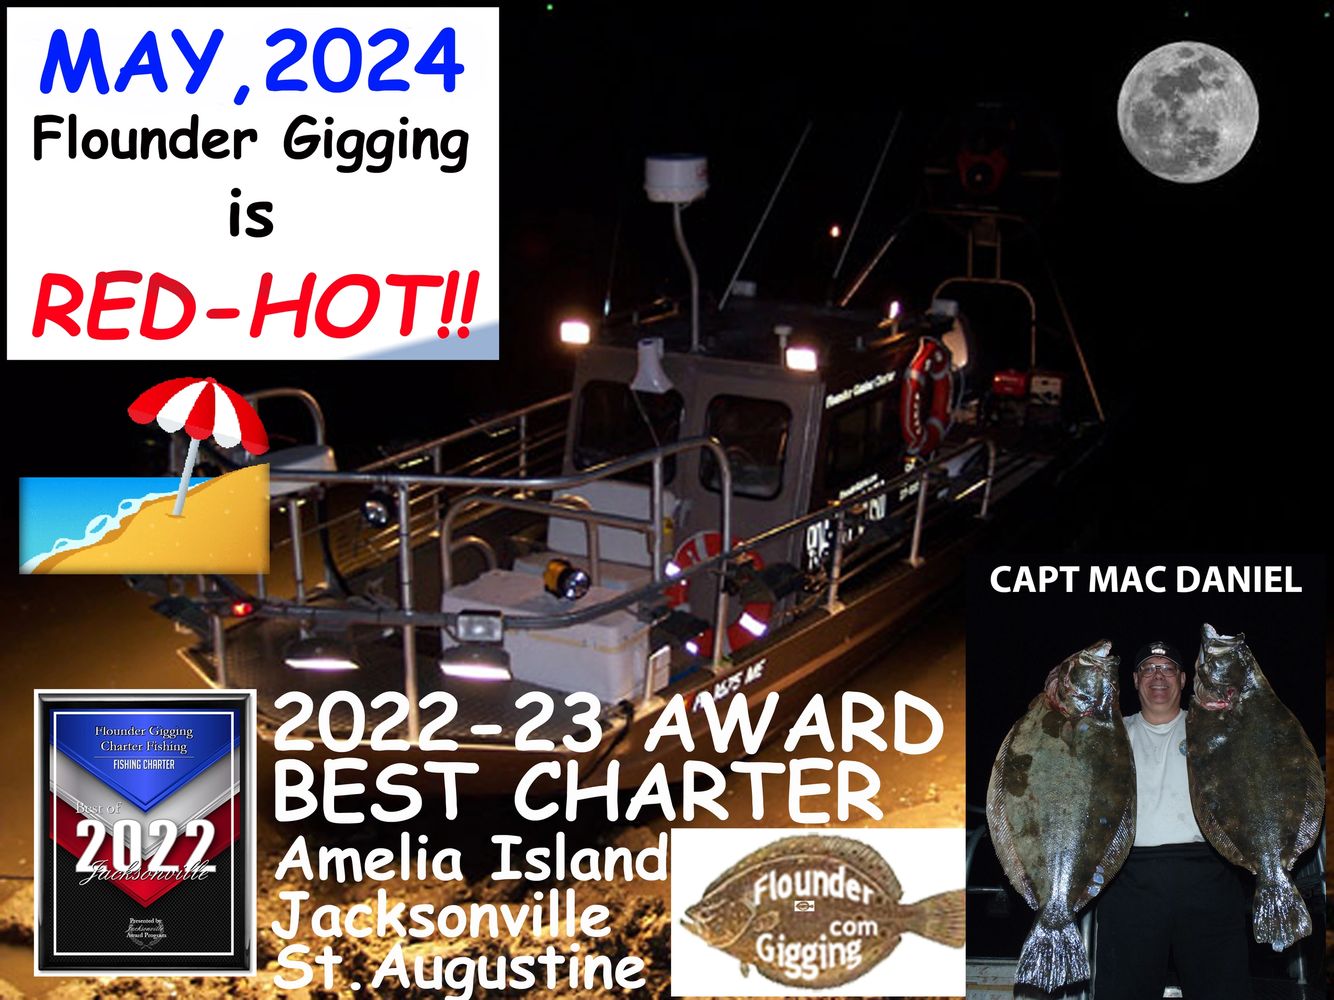 Our boat, the Flounder Barge, by the edge of the water in May, 2024. Text us at 904-556-0230.